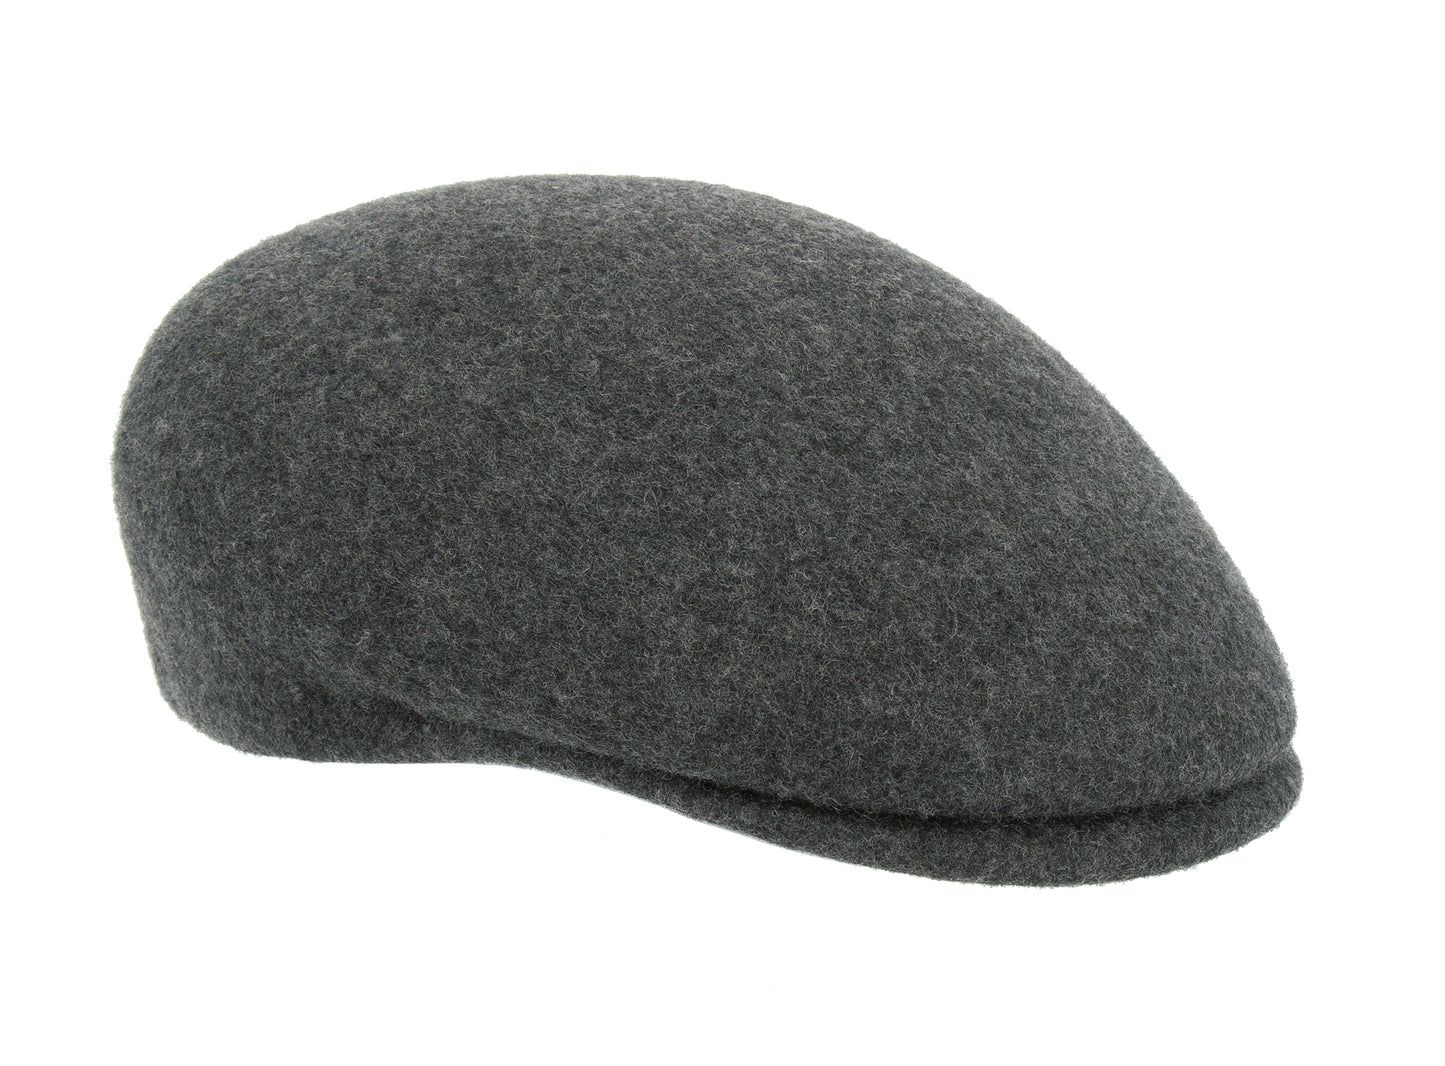 Crumpleable wool felt hat for women and men with leather hat band and logo